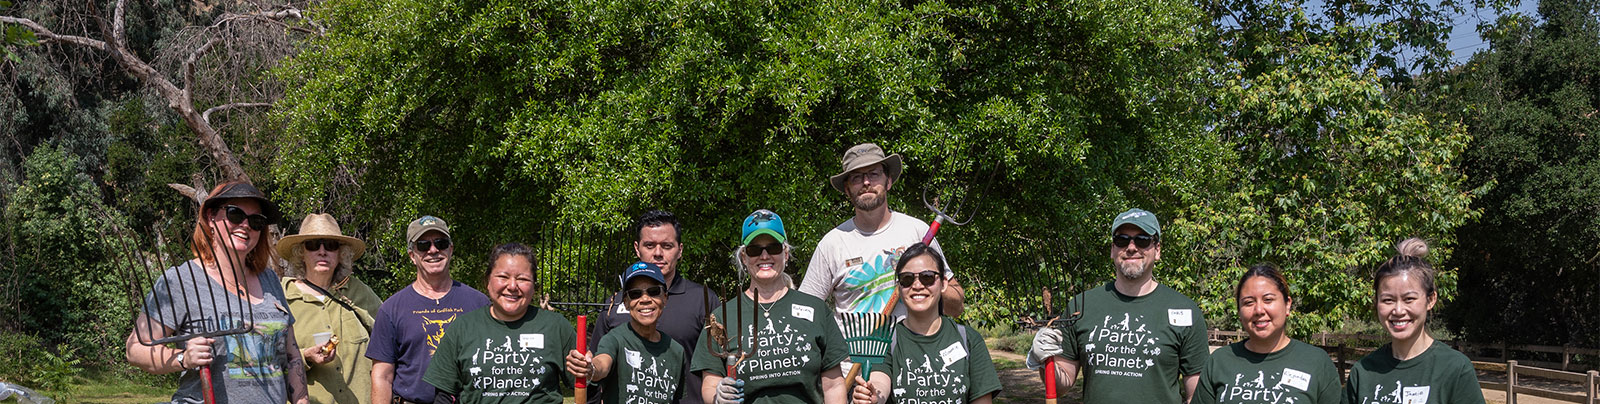 Zoo staff and volunteers collaborate with organizations in habitat restoration